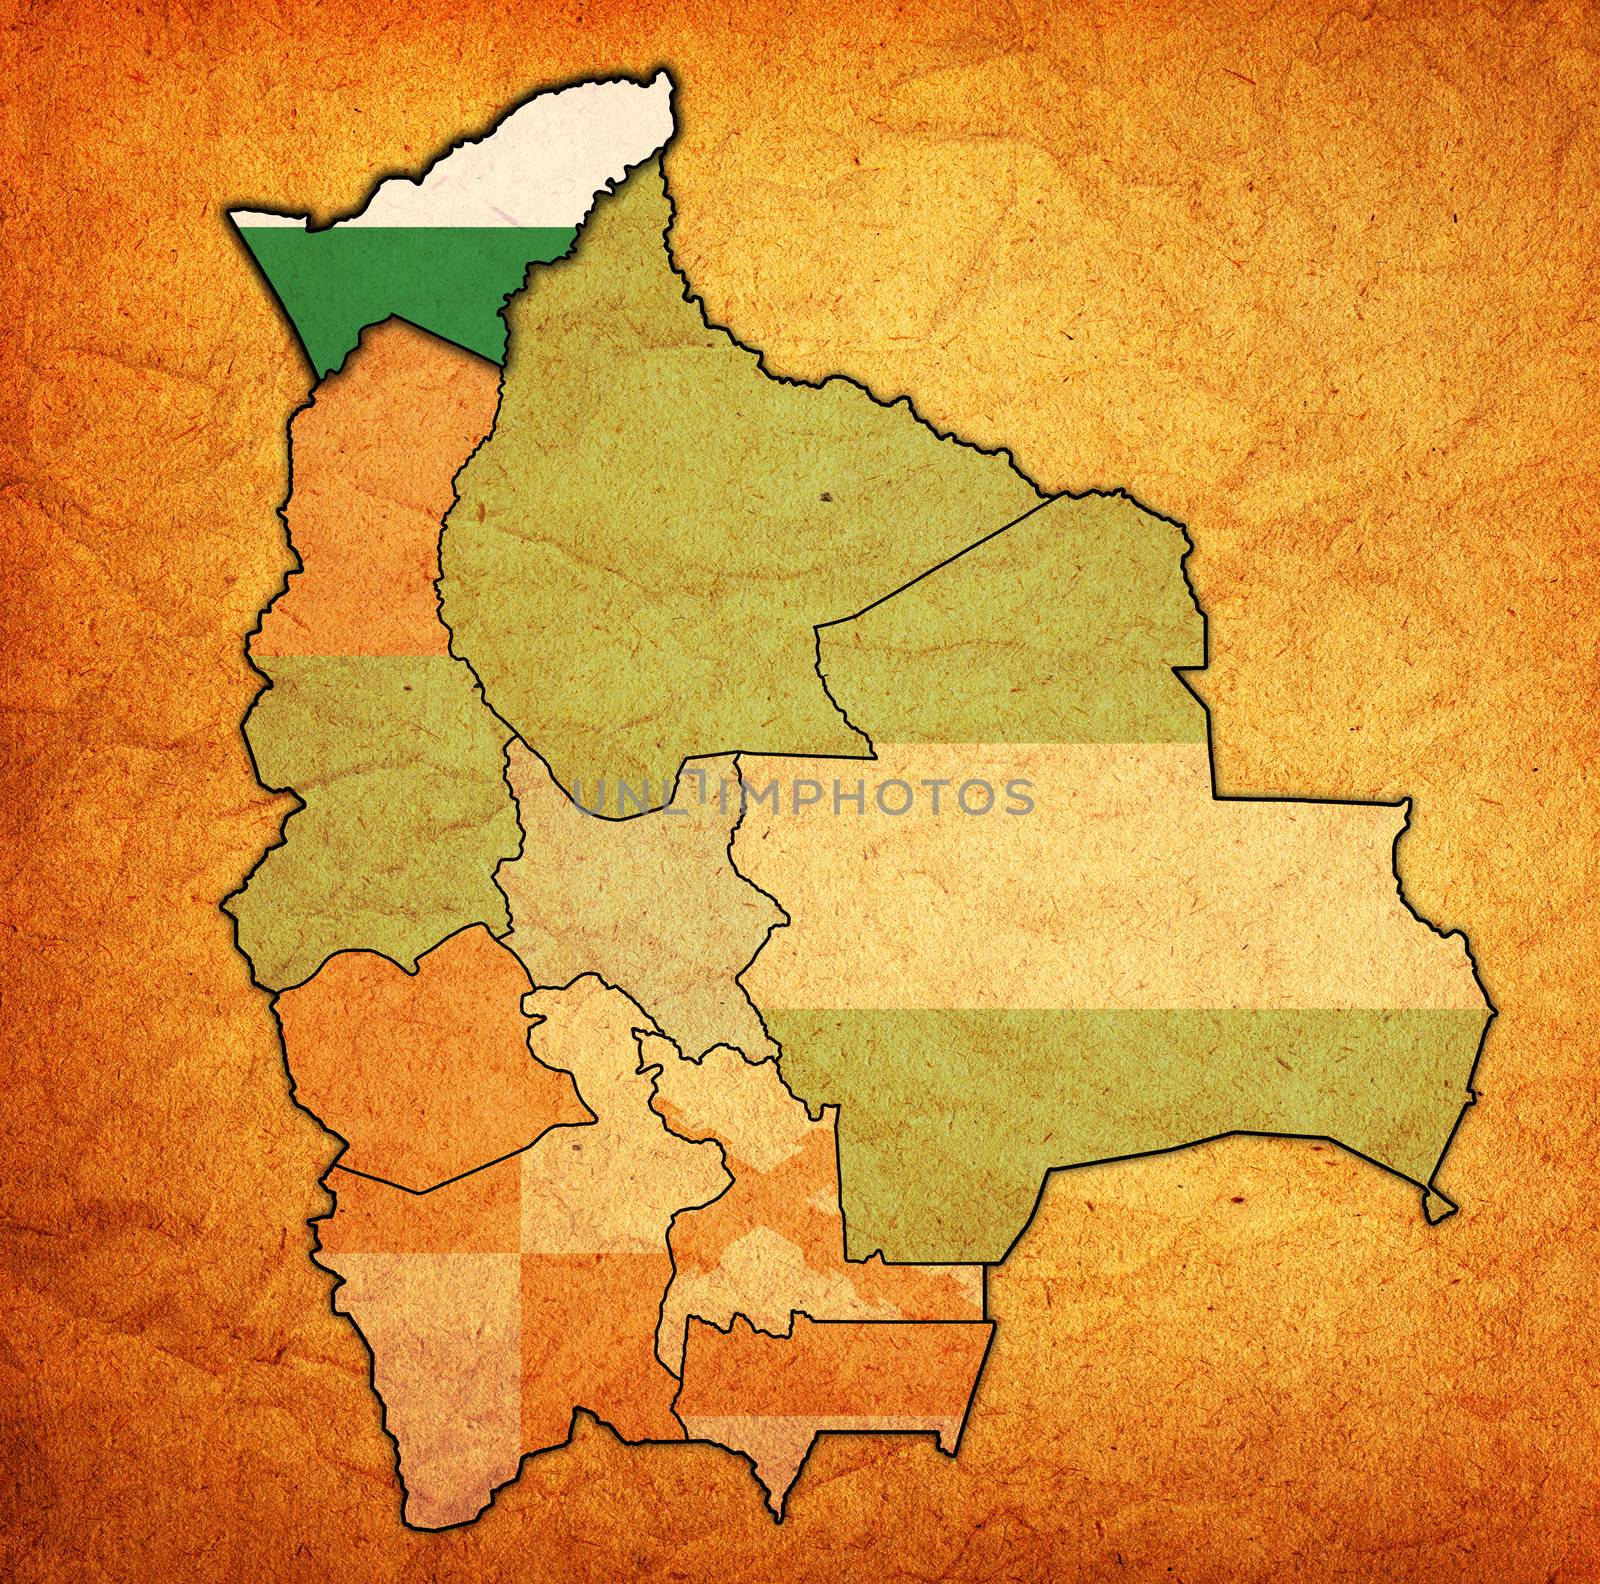 territory and flag of Pando region on map with administrative divisions and borders of Bolivia with clipping path